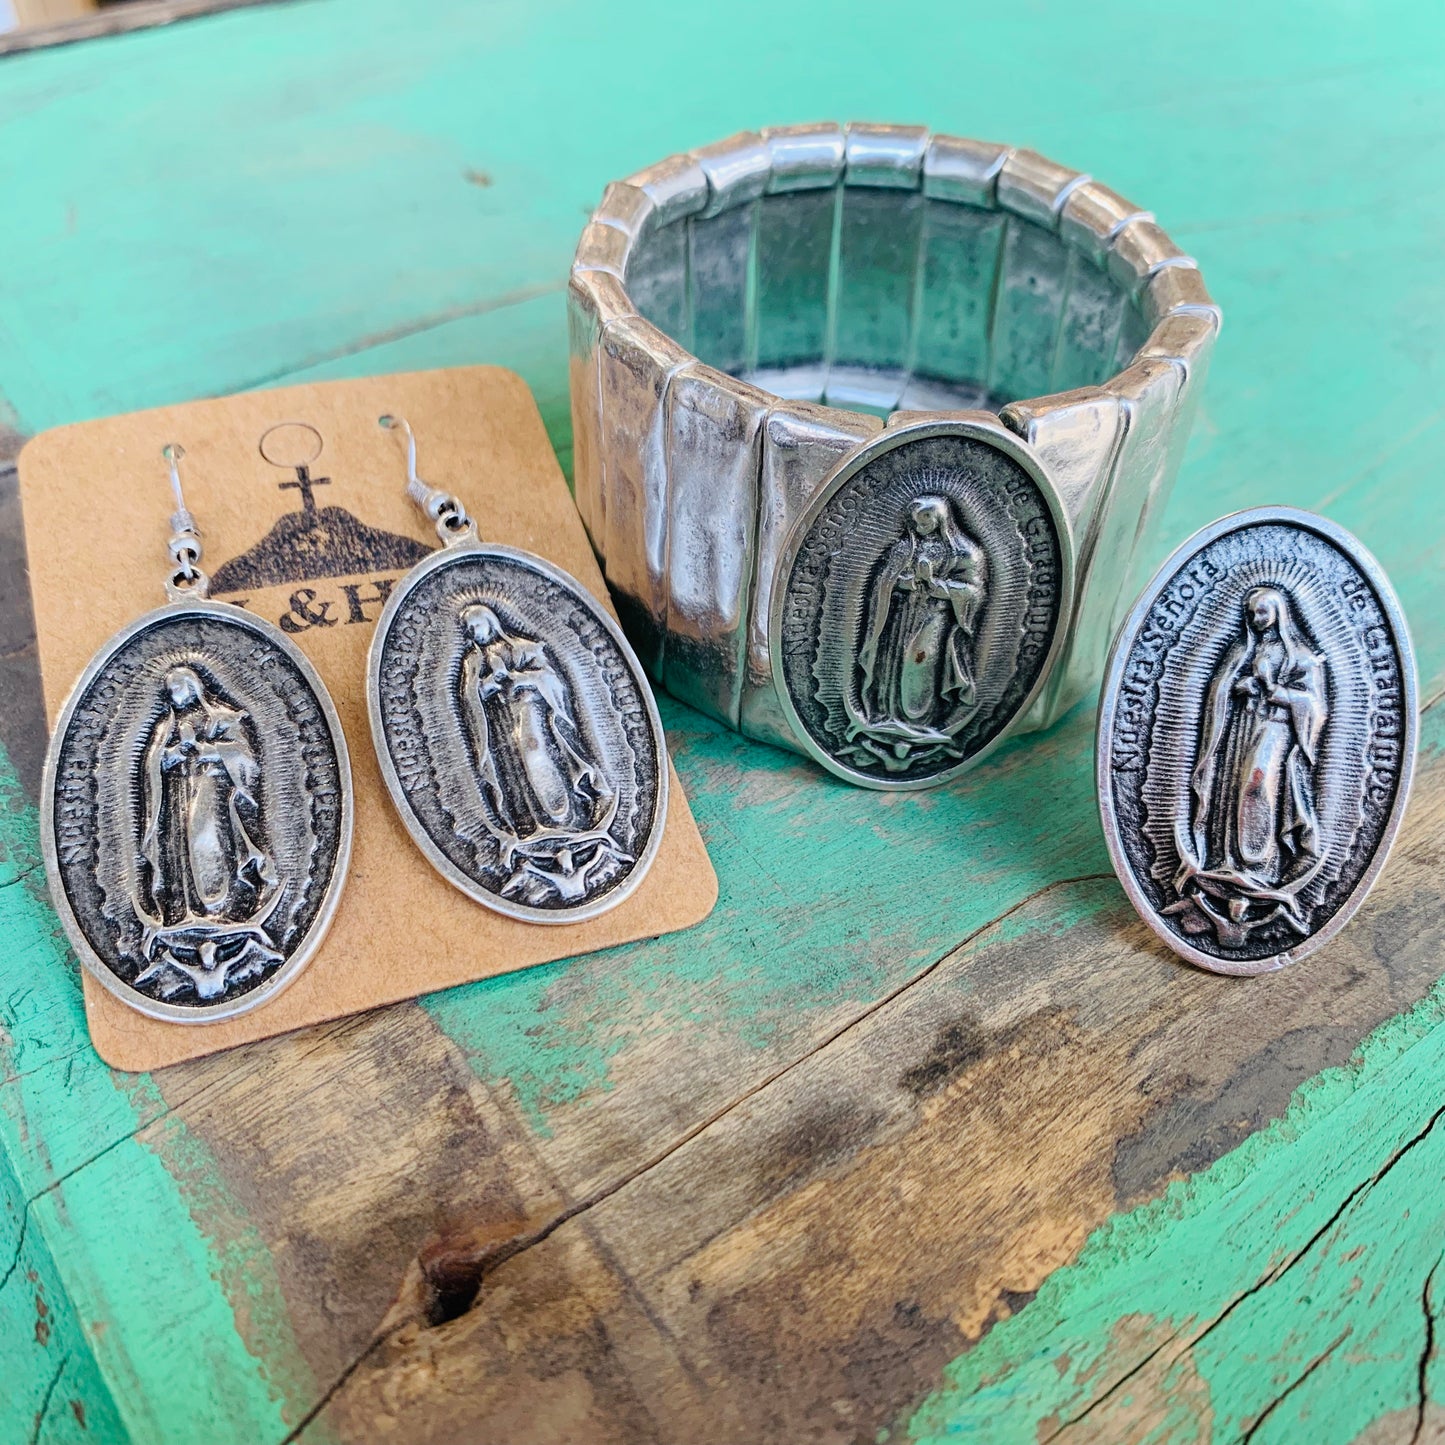 Our Lady of Guadalupe Oval Pieces